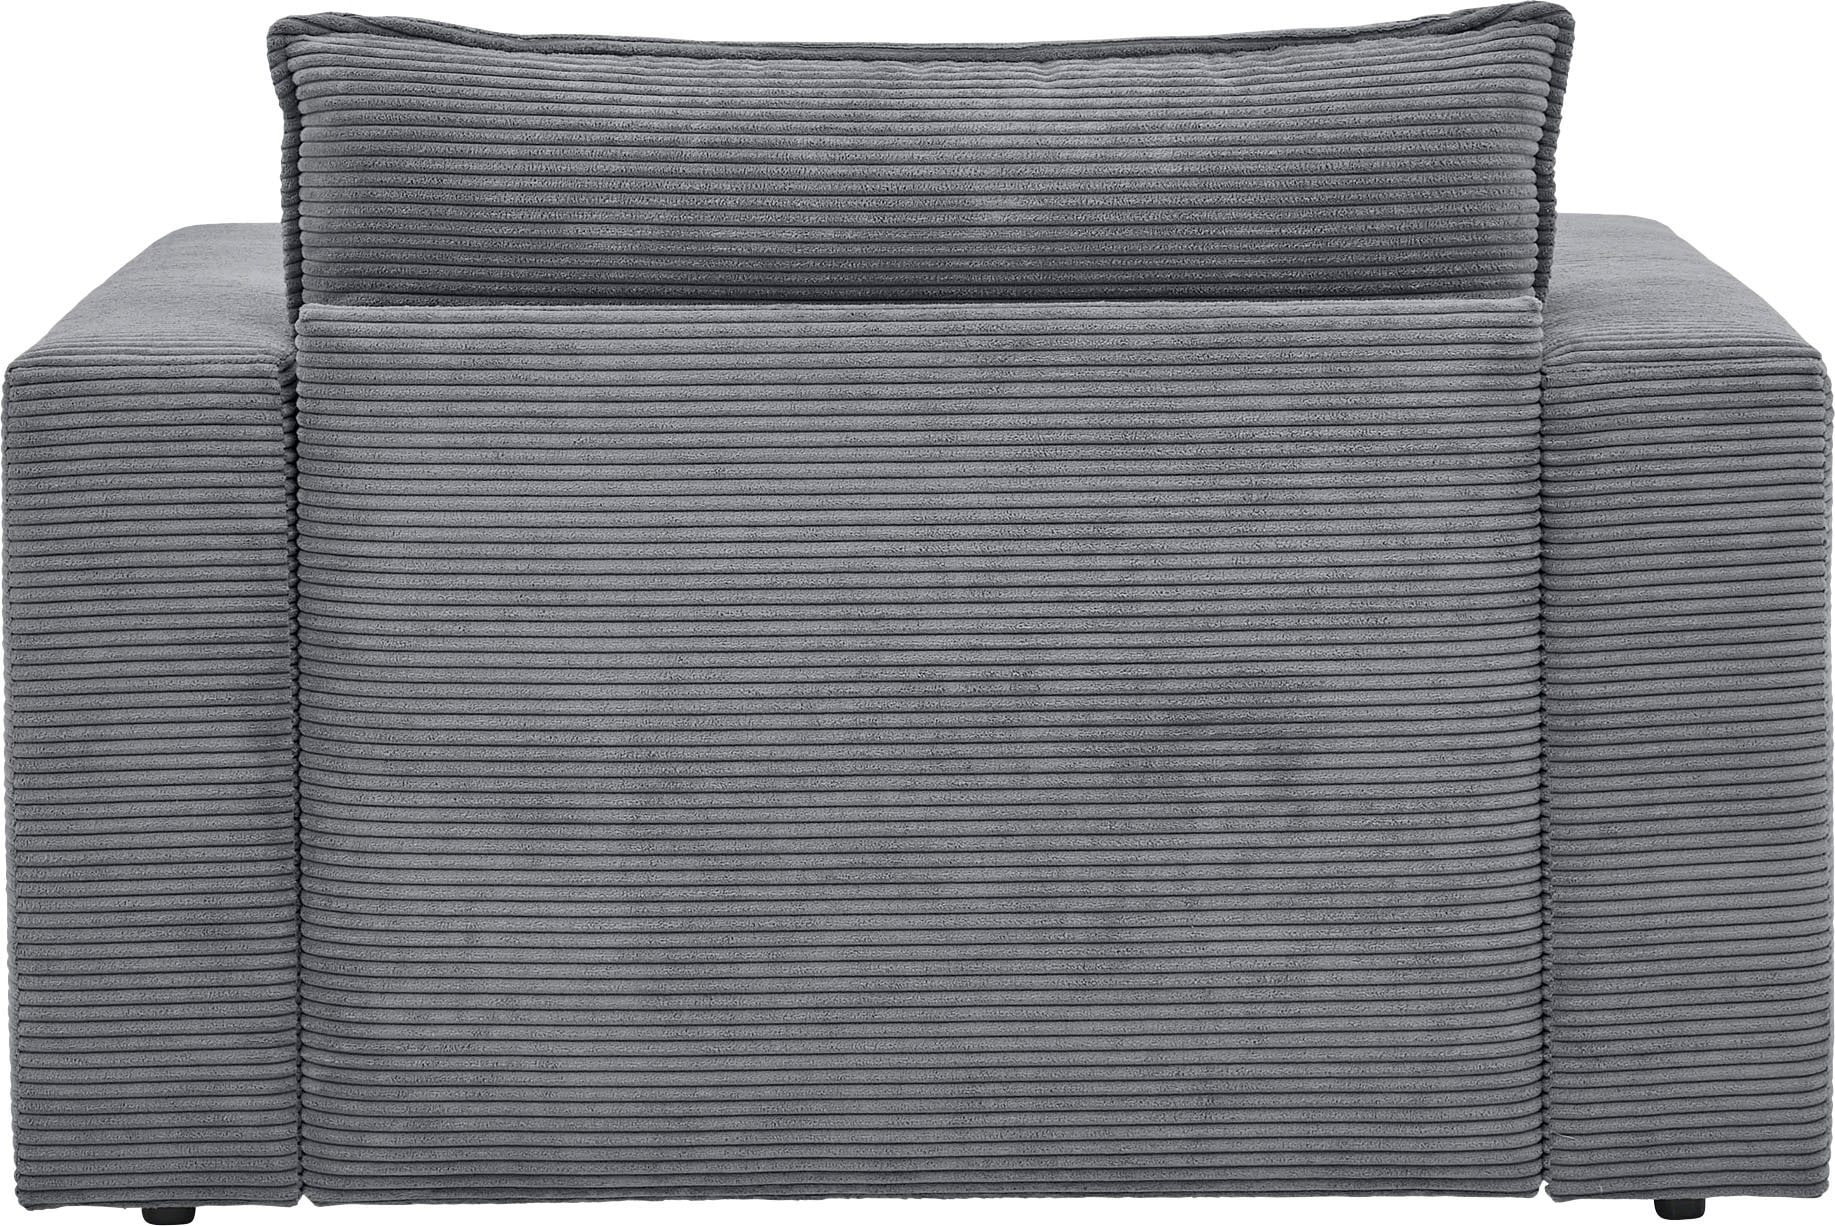 Cord, Loveseat OTTO »PIAGGE«, of bei Style trendiger Loveseat Hochwertiger Places